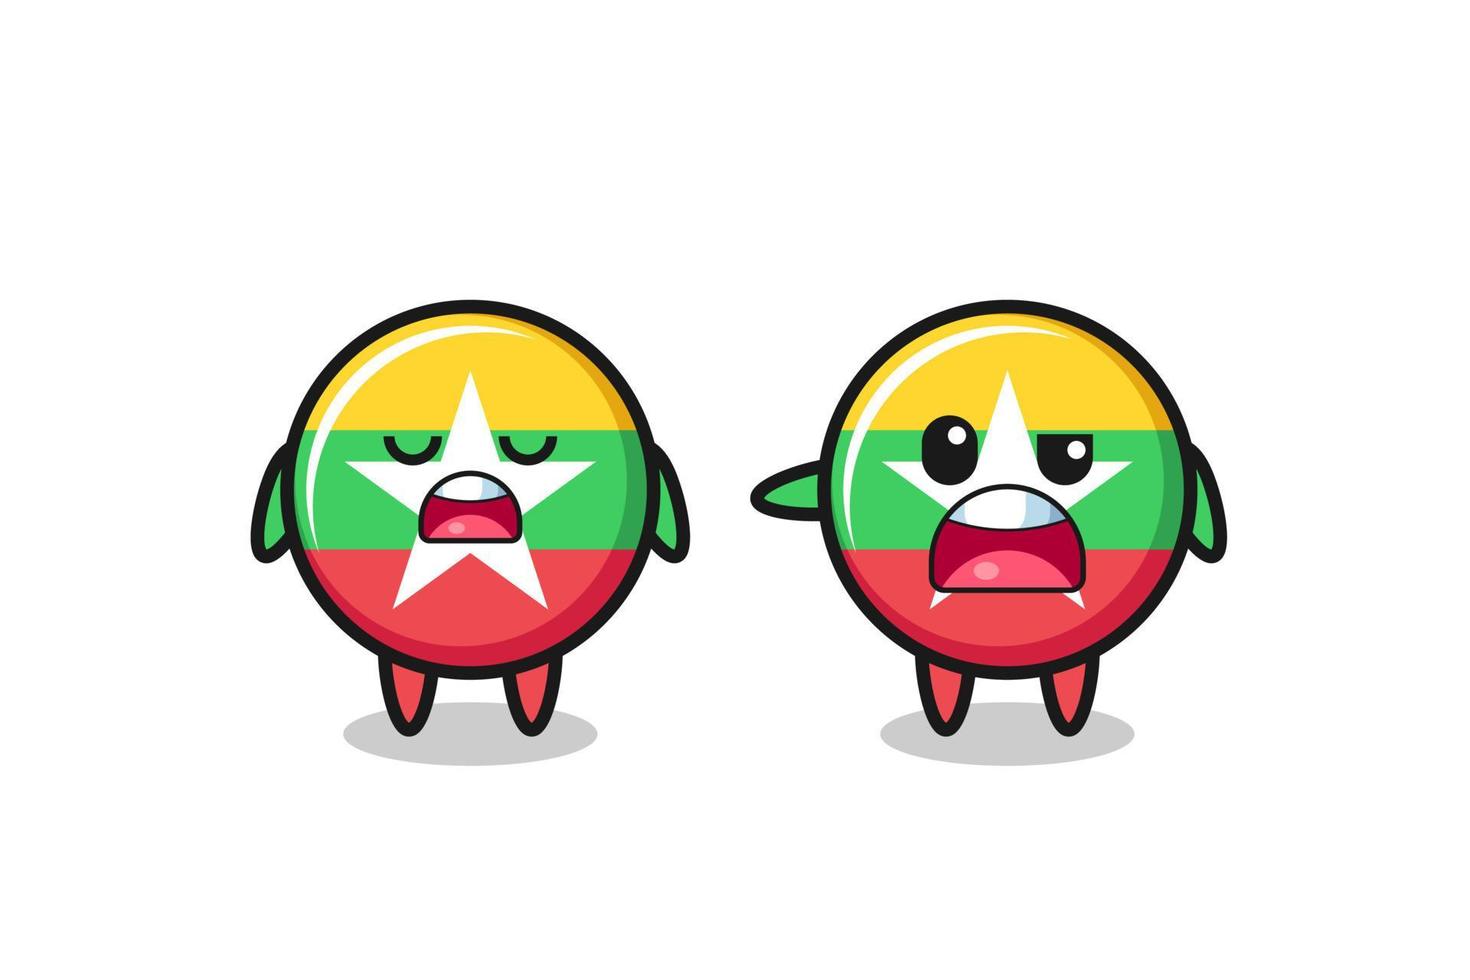 illustration of the argue between two cute myanmar flag characters vector